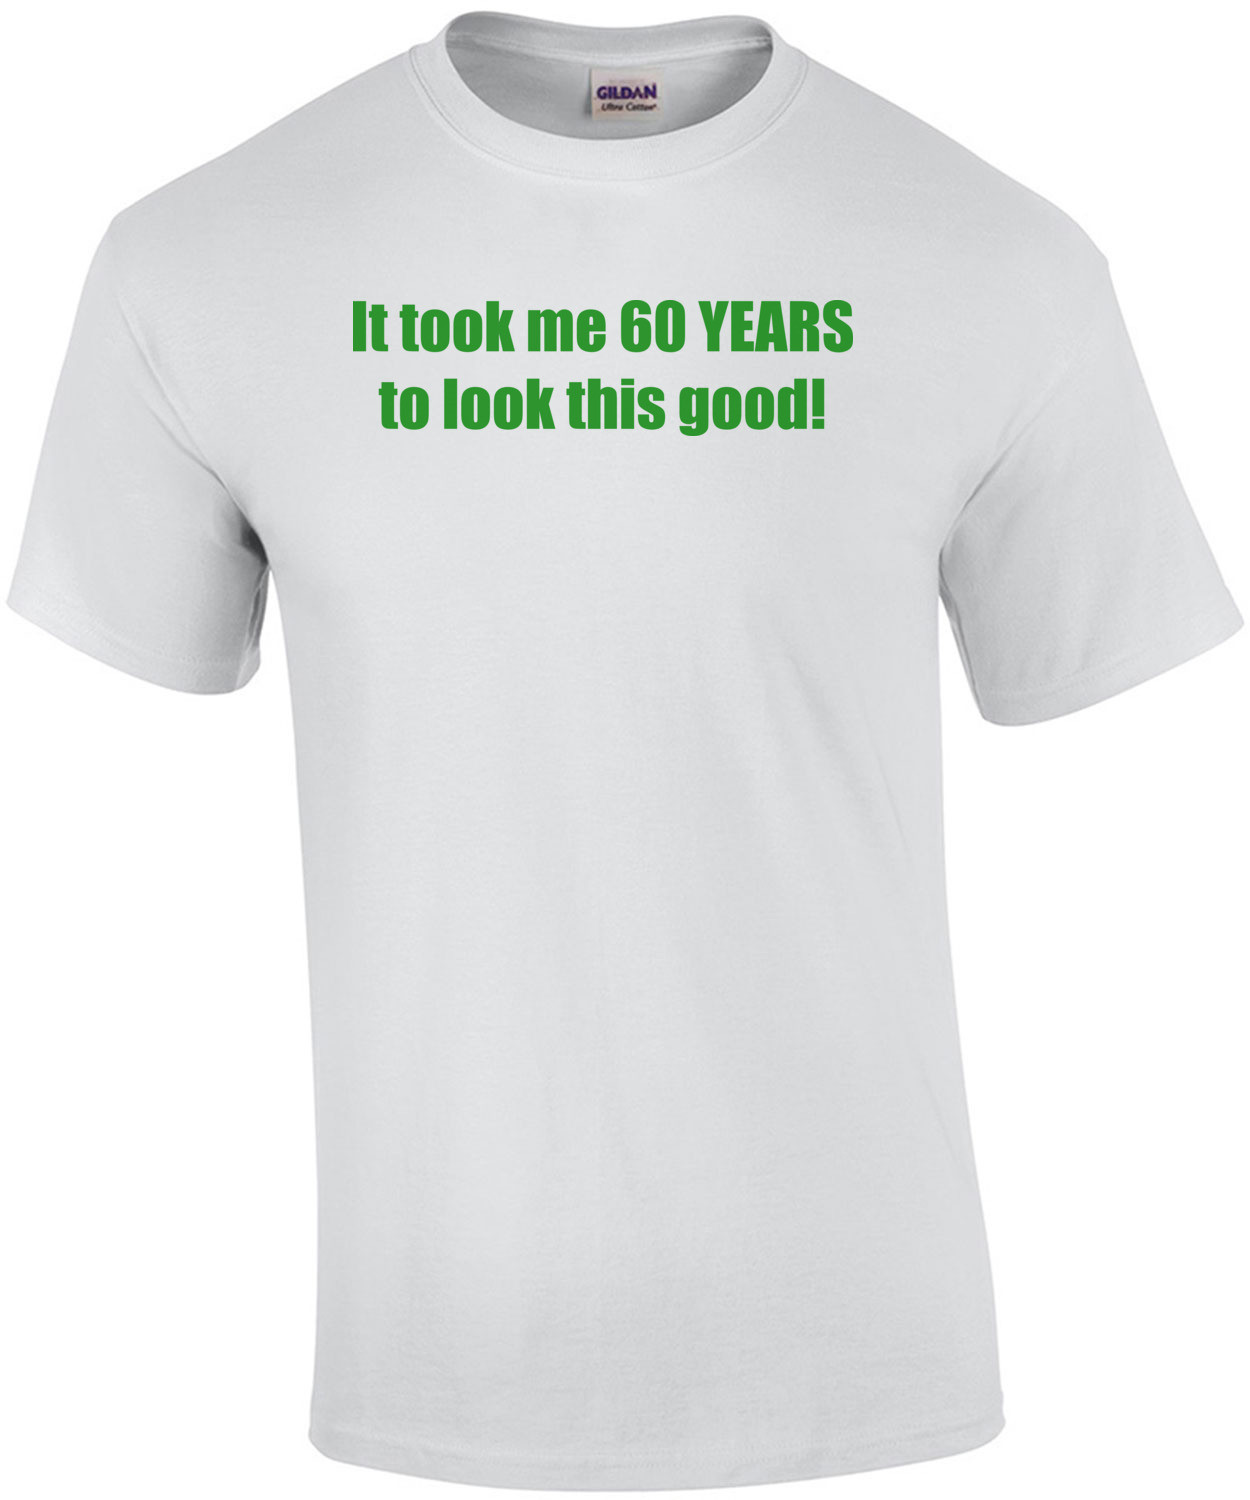 It took me 60 YEARS to look this good! - Happy Birthday Shirt